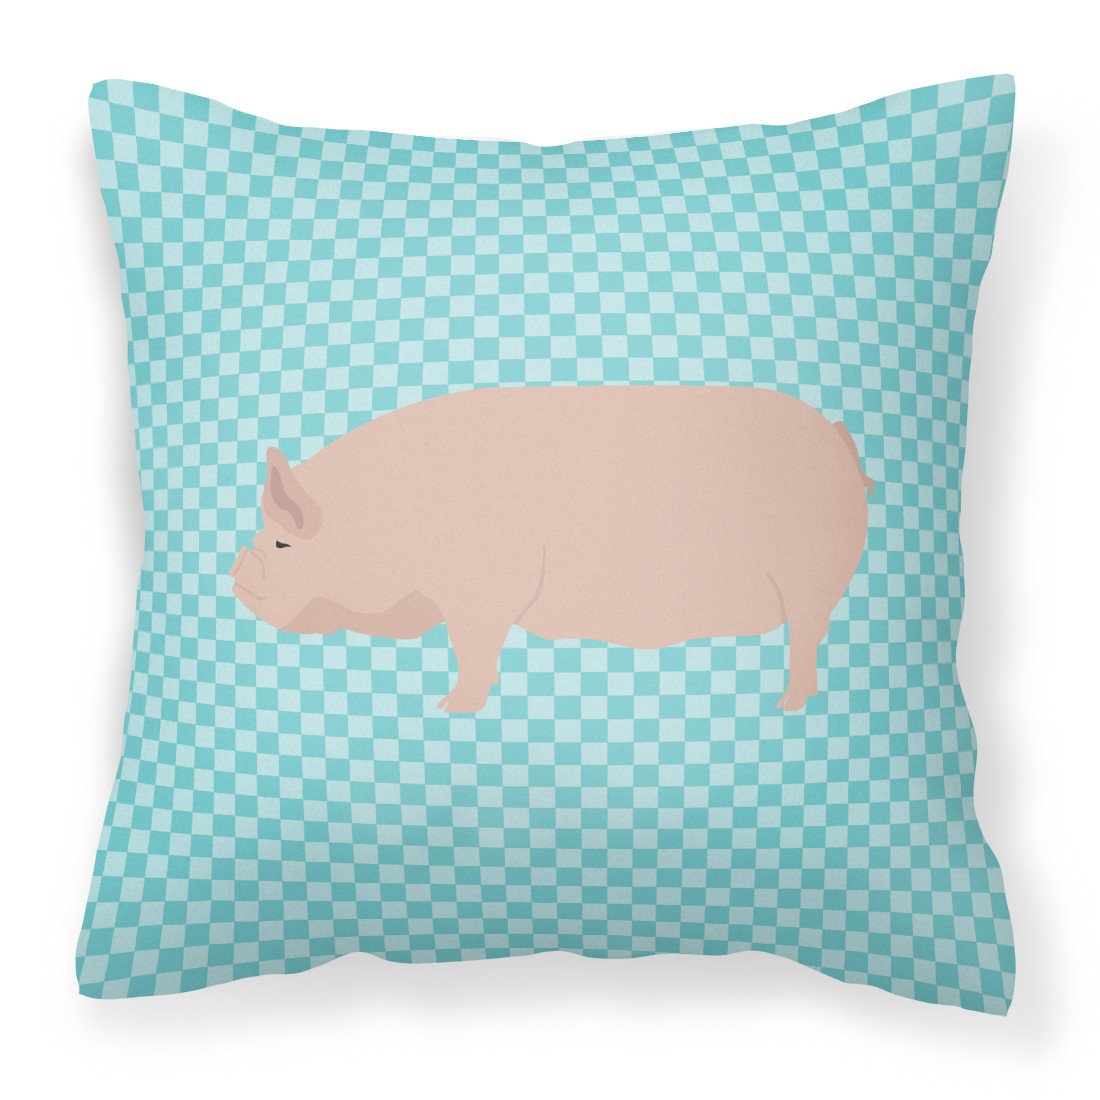 Welsh Pig Blue Check Fabric Decorative Pillow BB8111PW1818 by Caroline's Treasures